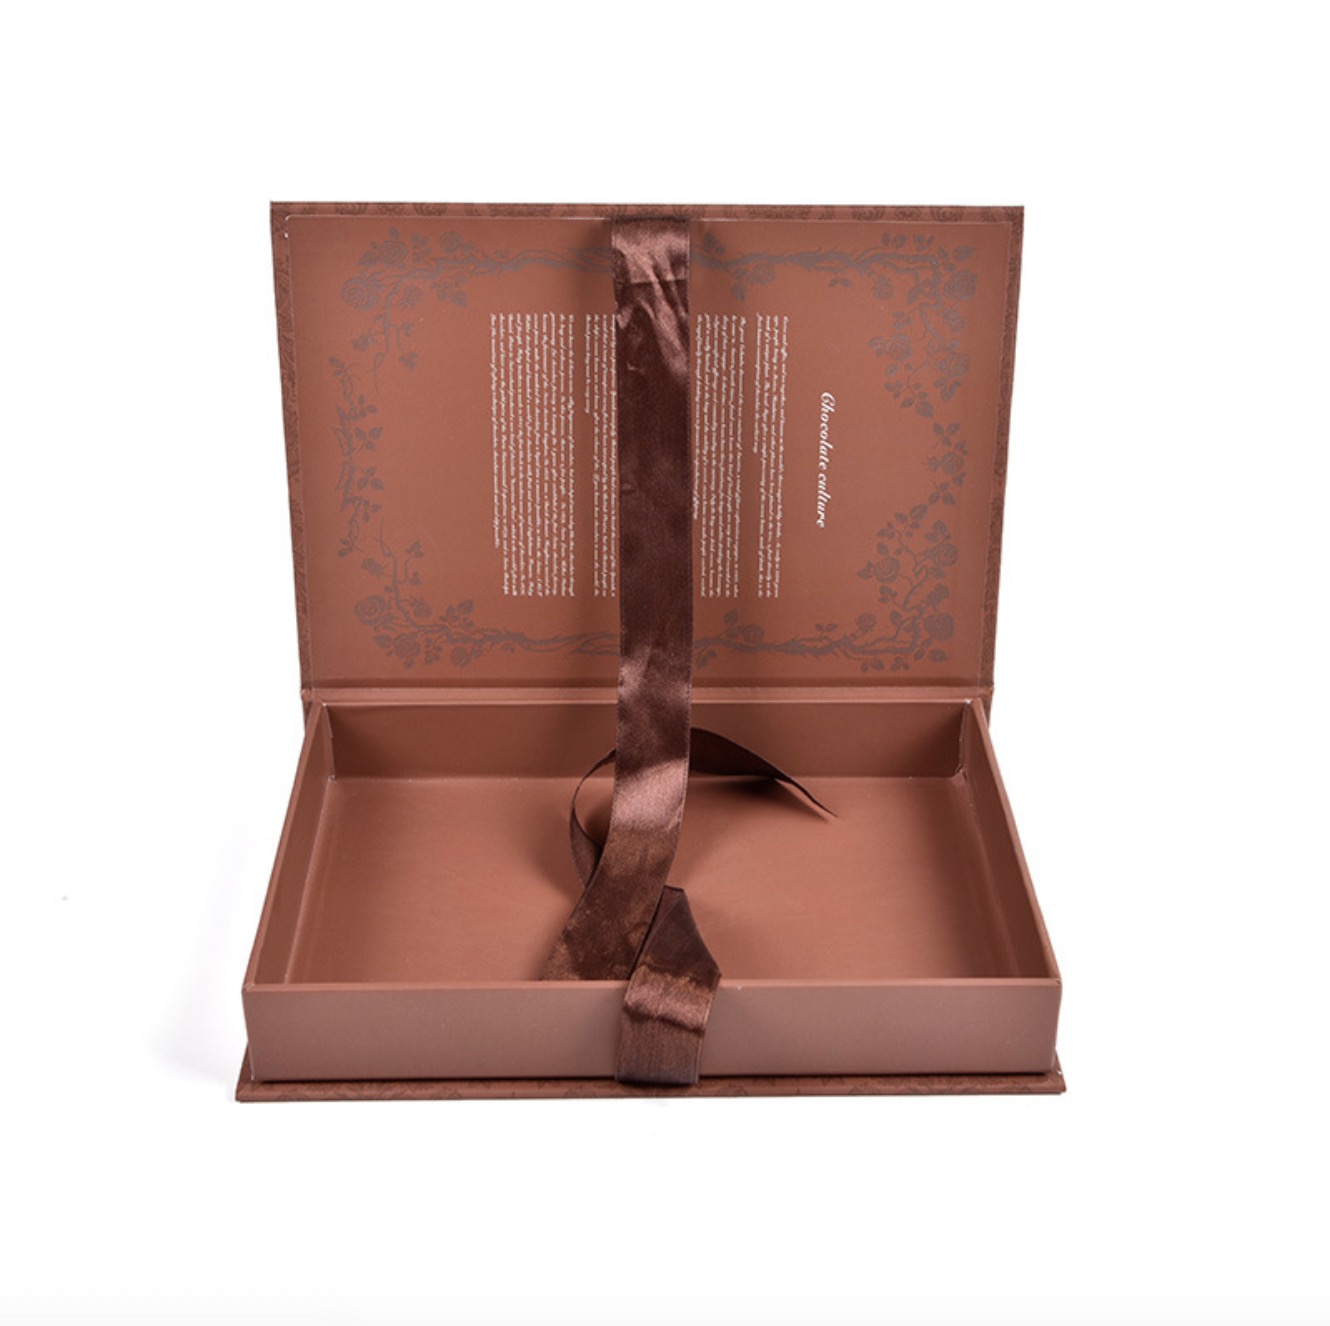 Do 2 inch gift boxes come with inserts or dividers?